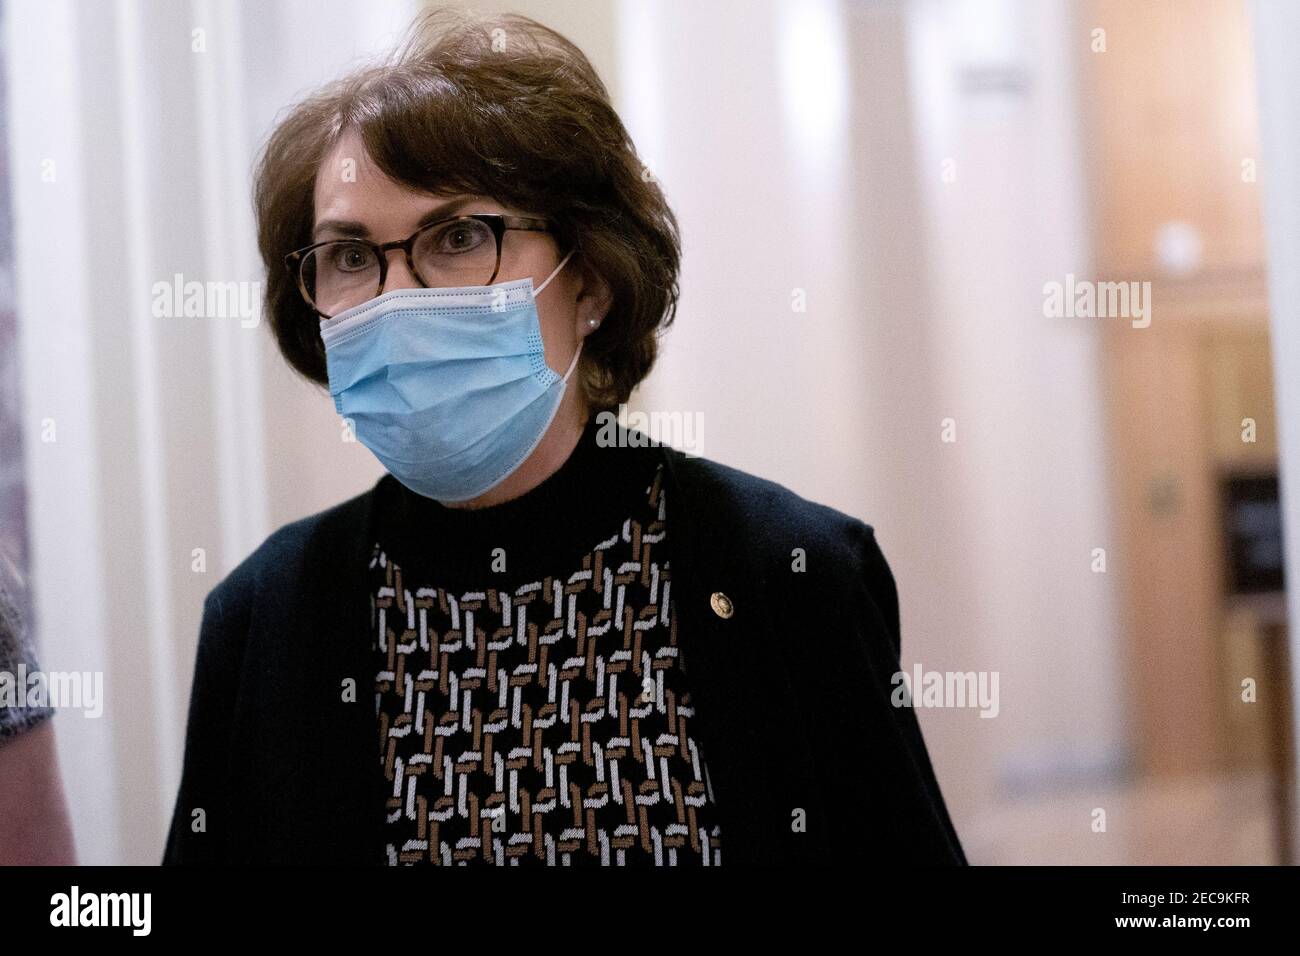 Washington, DC, USA. 13th Feb, 2021. Senator Jacky Rosen, a Democrat from Nevada, wears a protective mask while walking through the U.S. Capitol in Washington, DC, U.S., on Saturday, Feb. 13, 2021. The Senate approved 55-45 a request to consider calling witnesses in the second impeachment trial of Donald Trump, a move that may extend the trial that was expected to end within hours. Credit: Stefani Reynolds - Pool via CNP | usage worldwide Credit: dpa/Alamy Live News Stock Photo